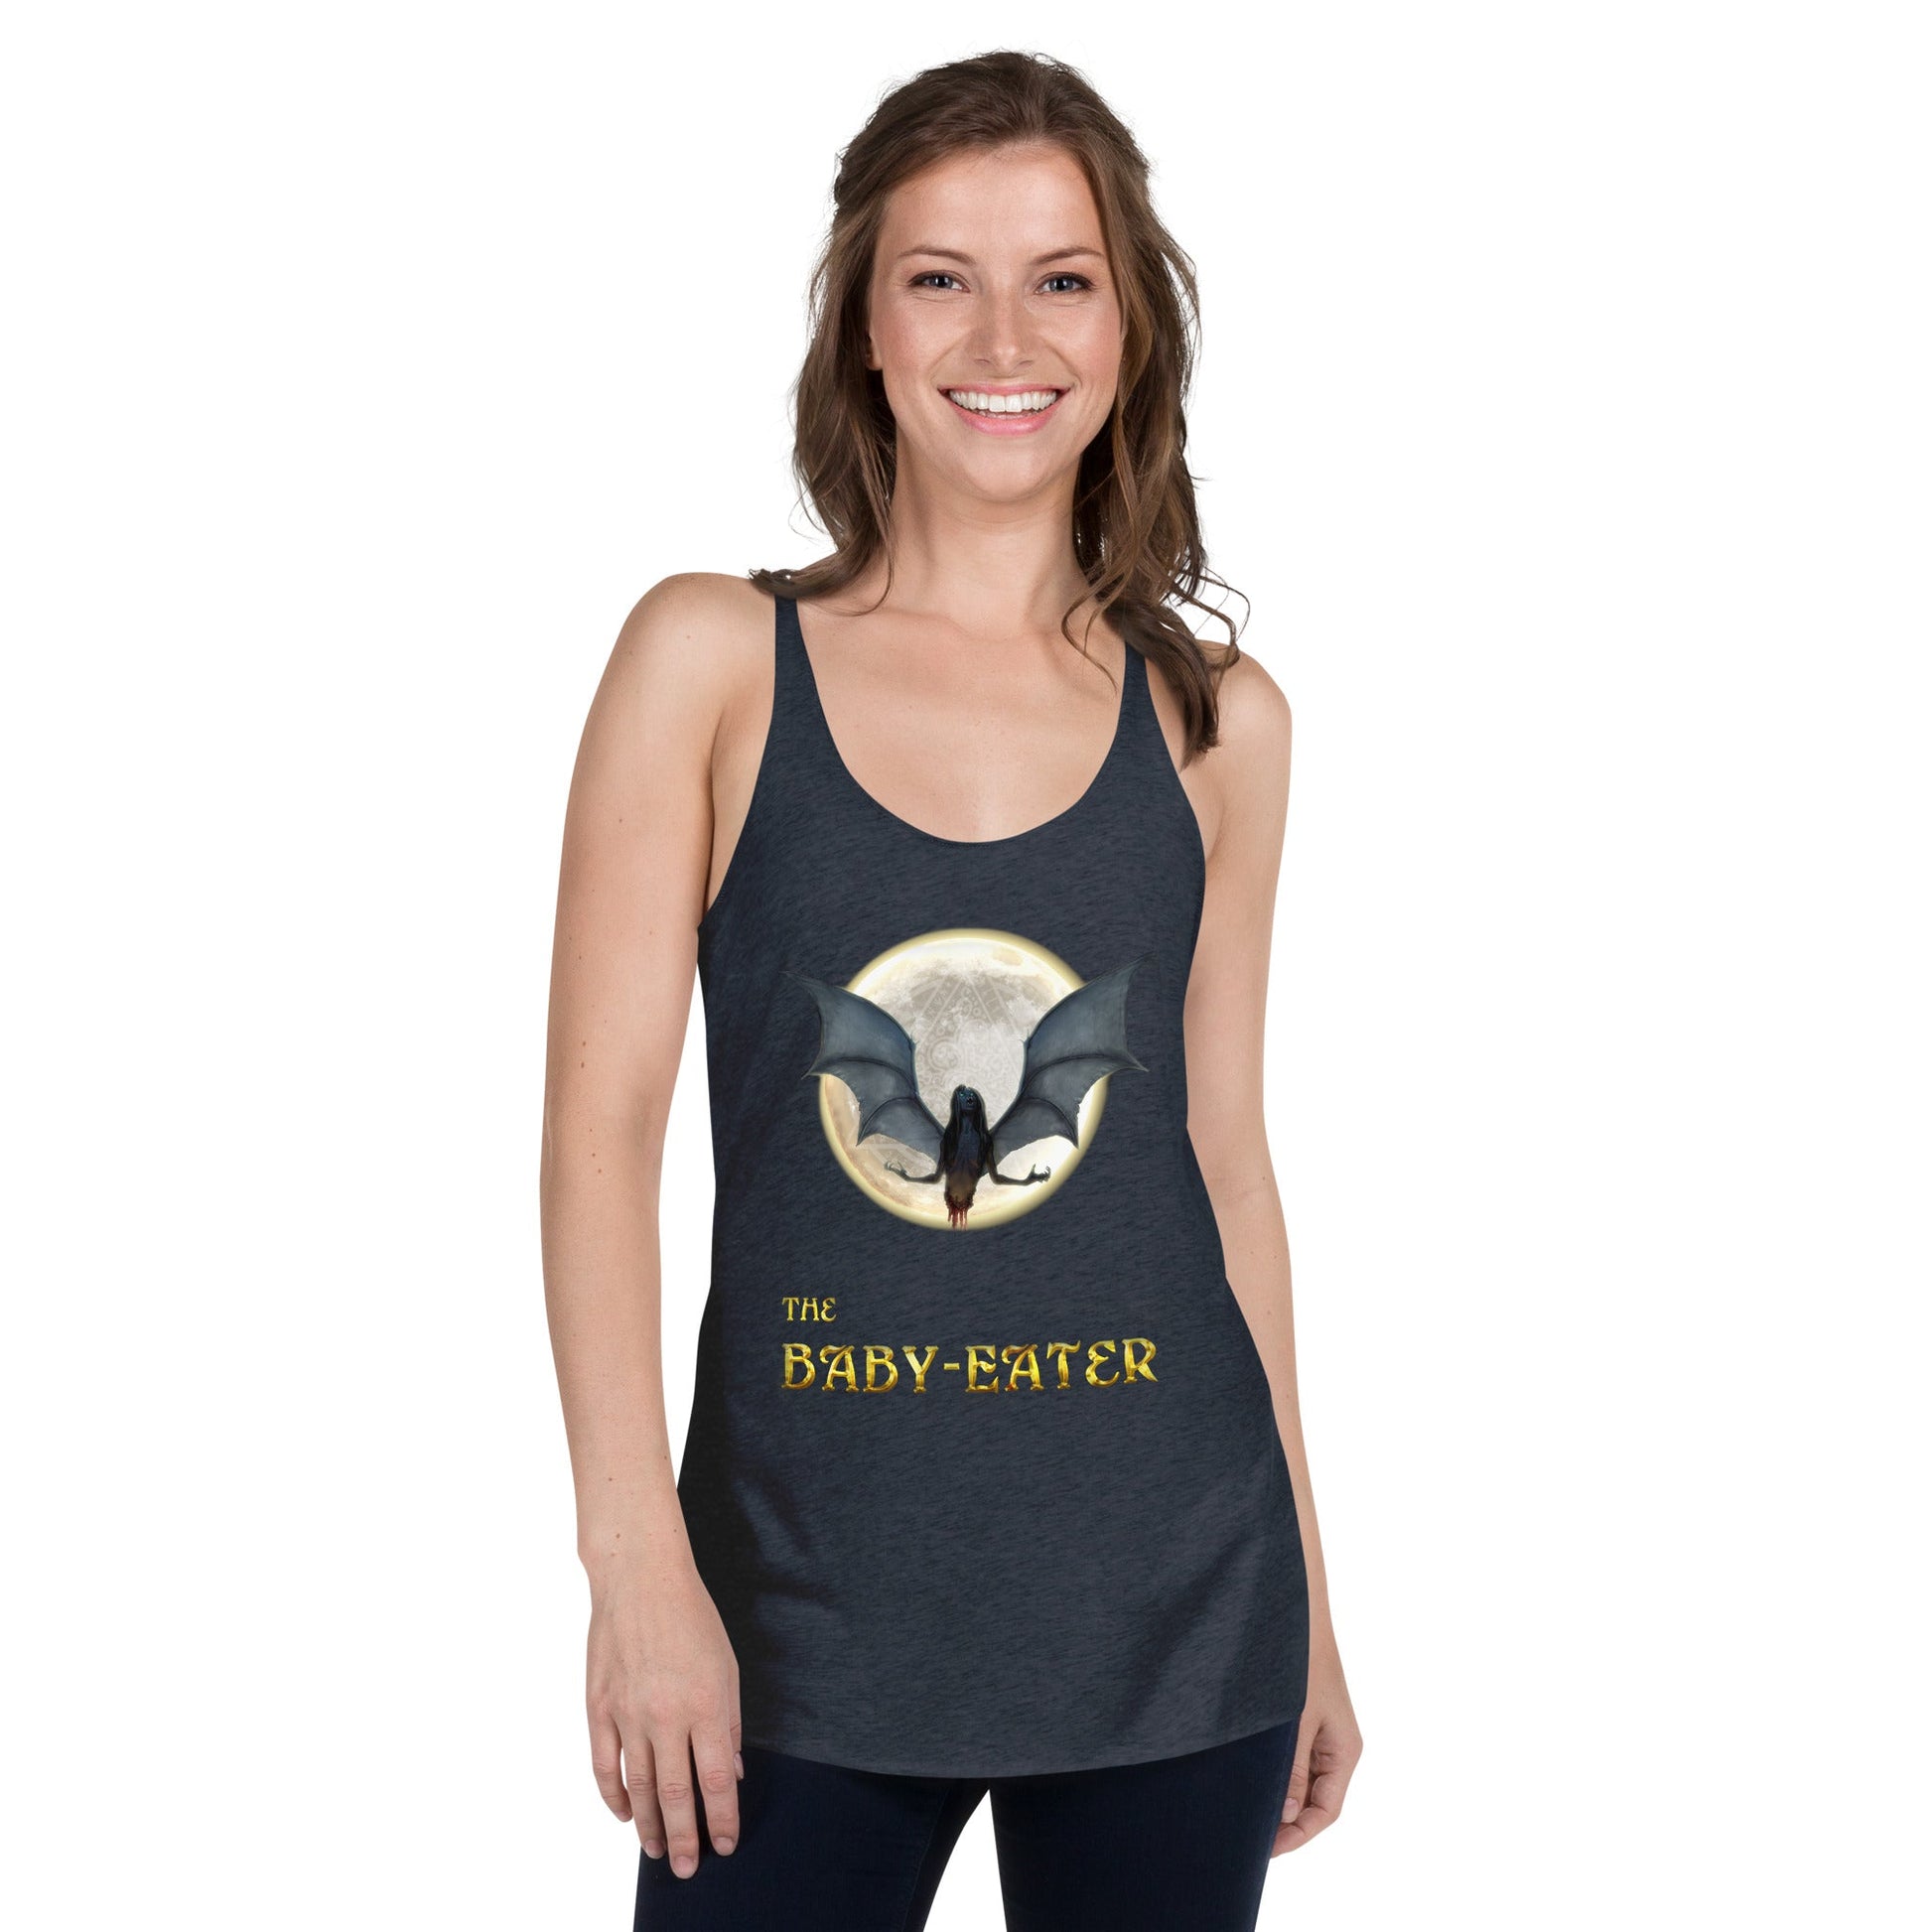 Women's Racerback Tank | The Baby-Eater - Spectral Ink Shop - Shirts & Tops -5157313_6656